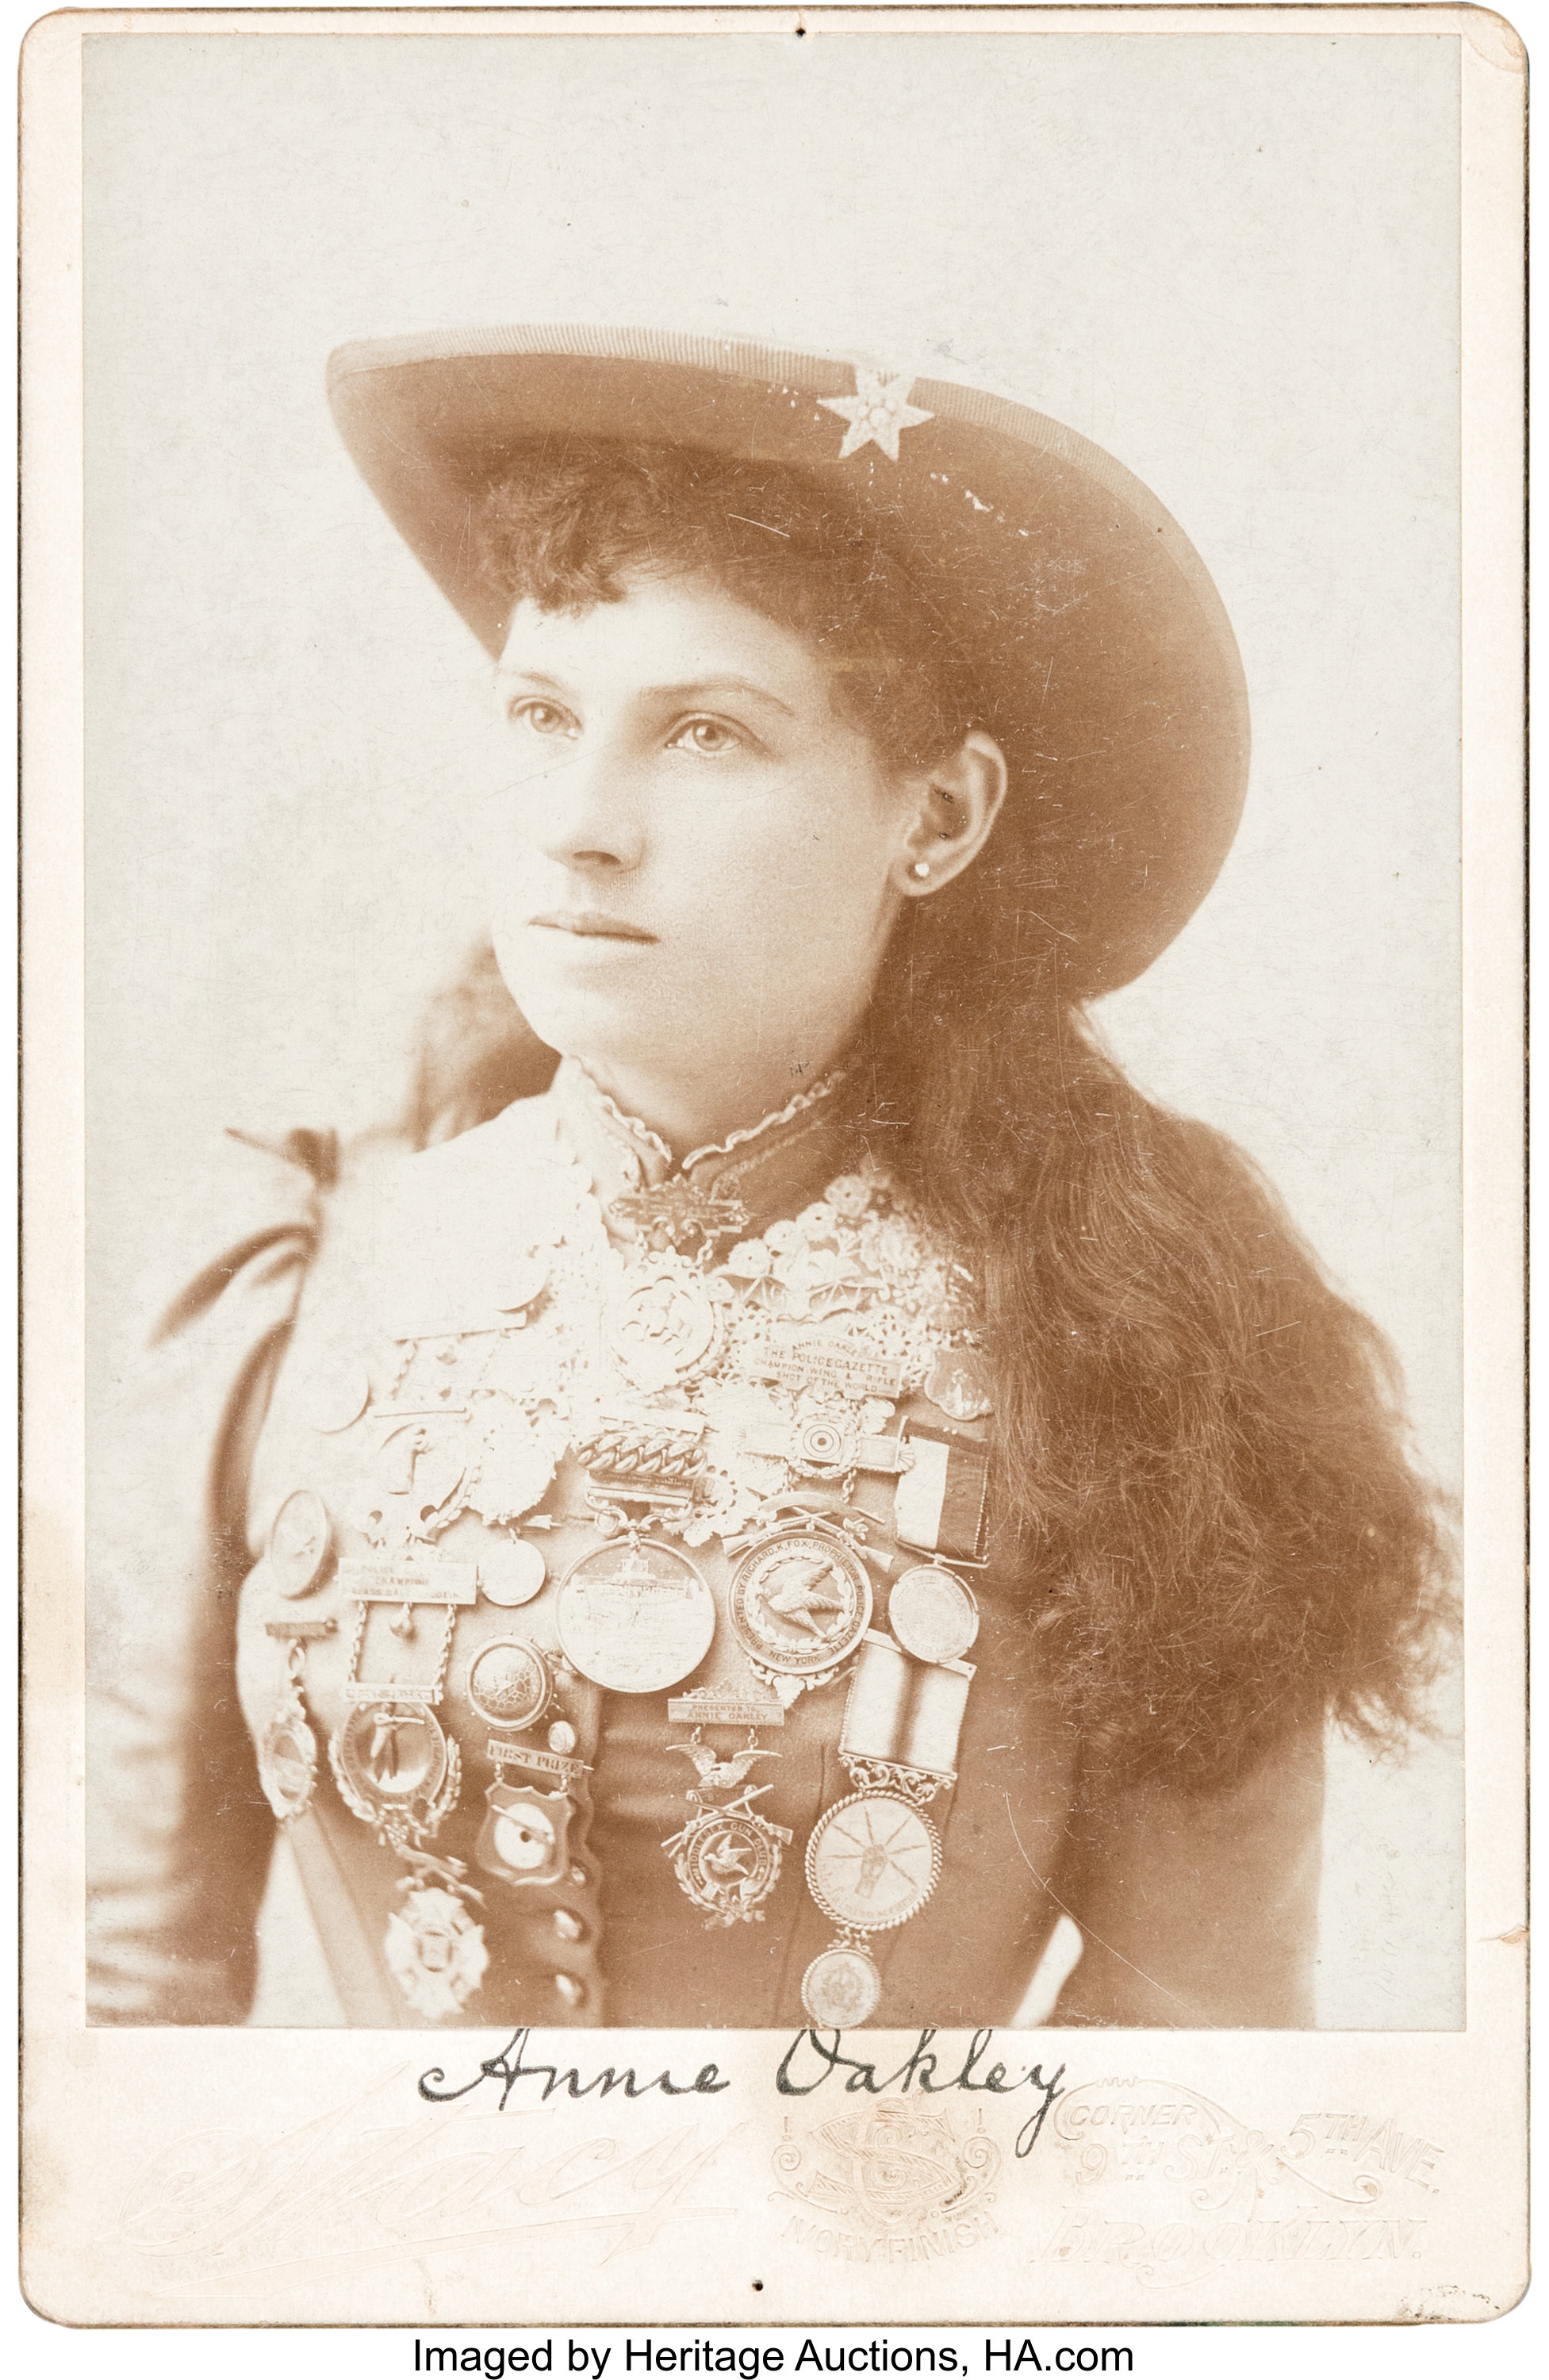 Annie Oakley: Great Stacy Cabinet Card Displaying All Her | Lot #43428 |  Heritage Auctions